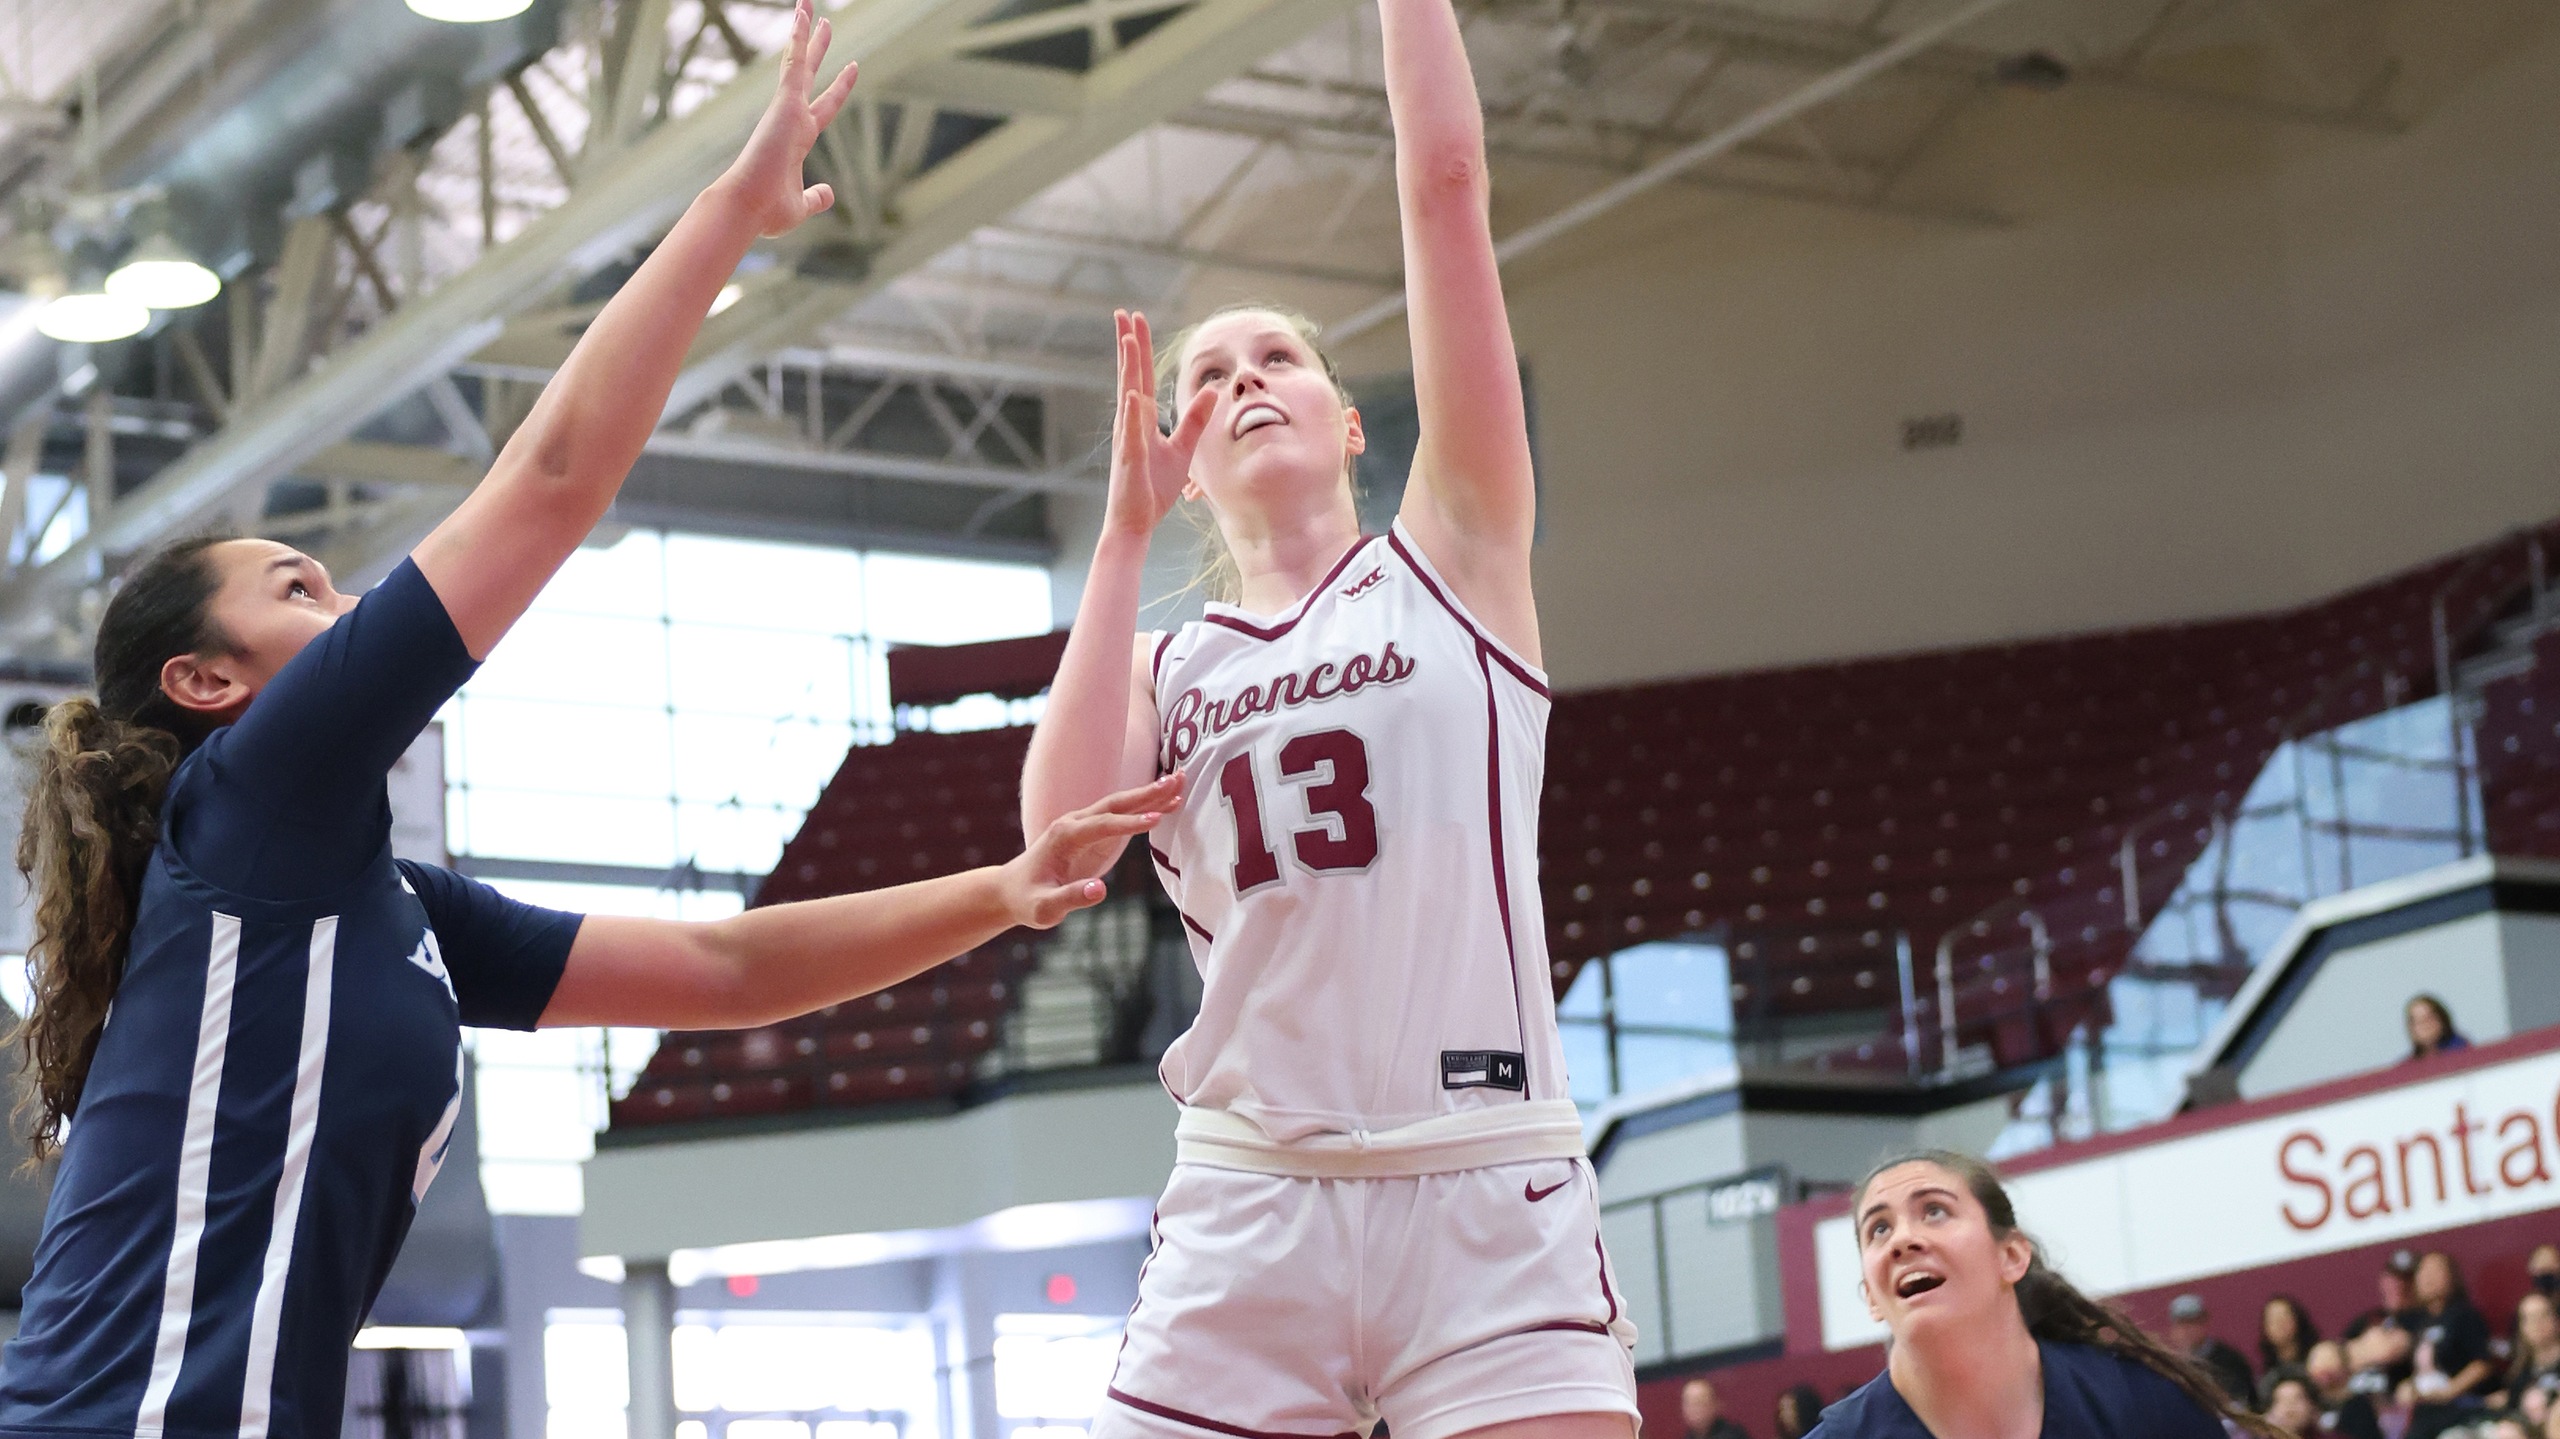 Women's Basketball Puts on an OT Thriller during Busy Senior Day